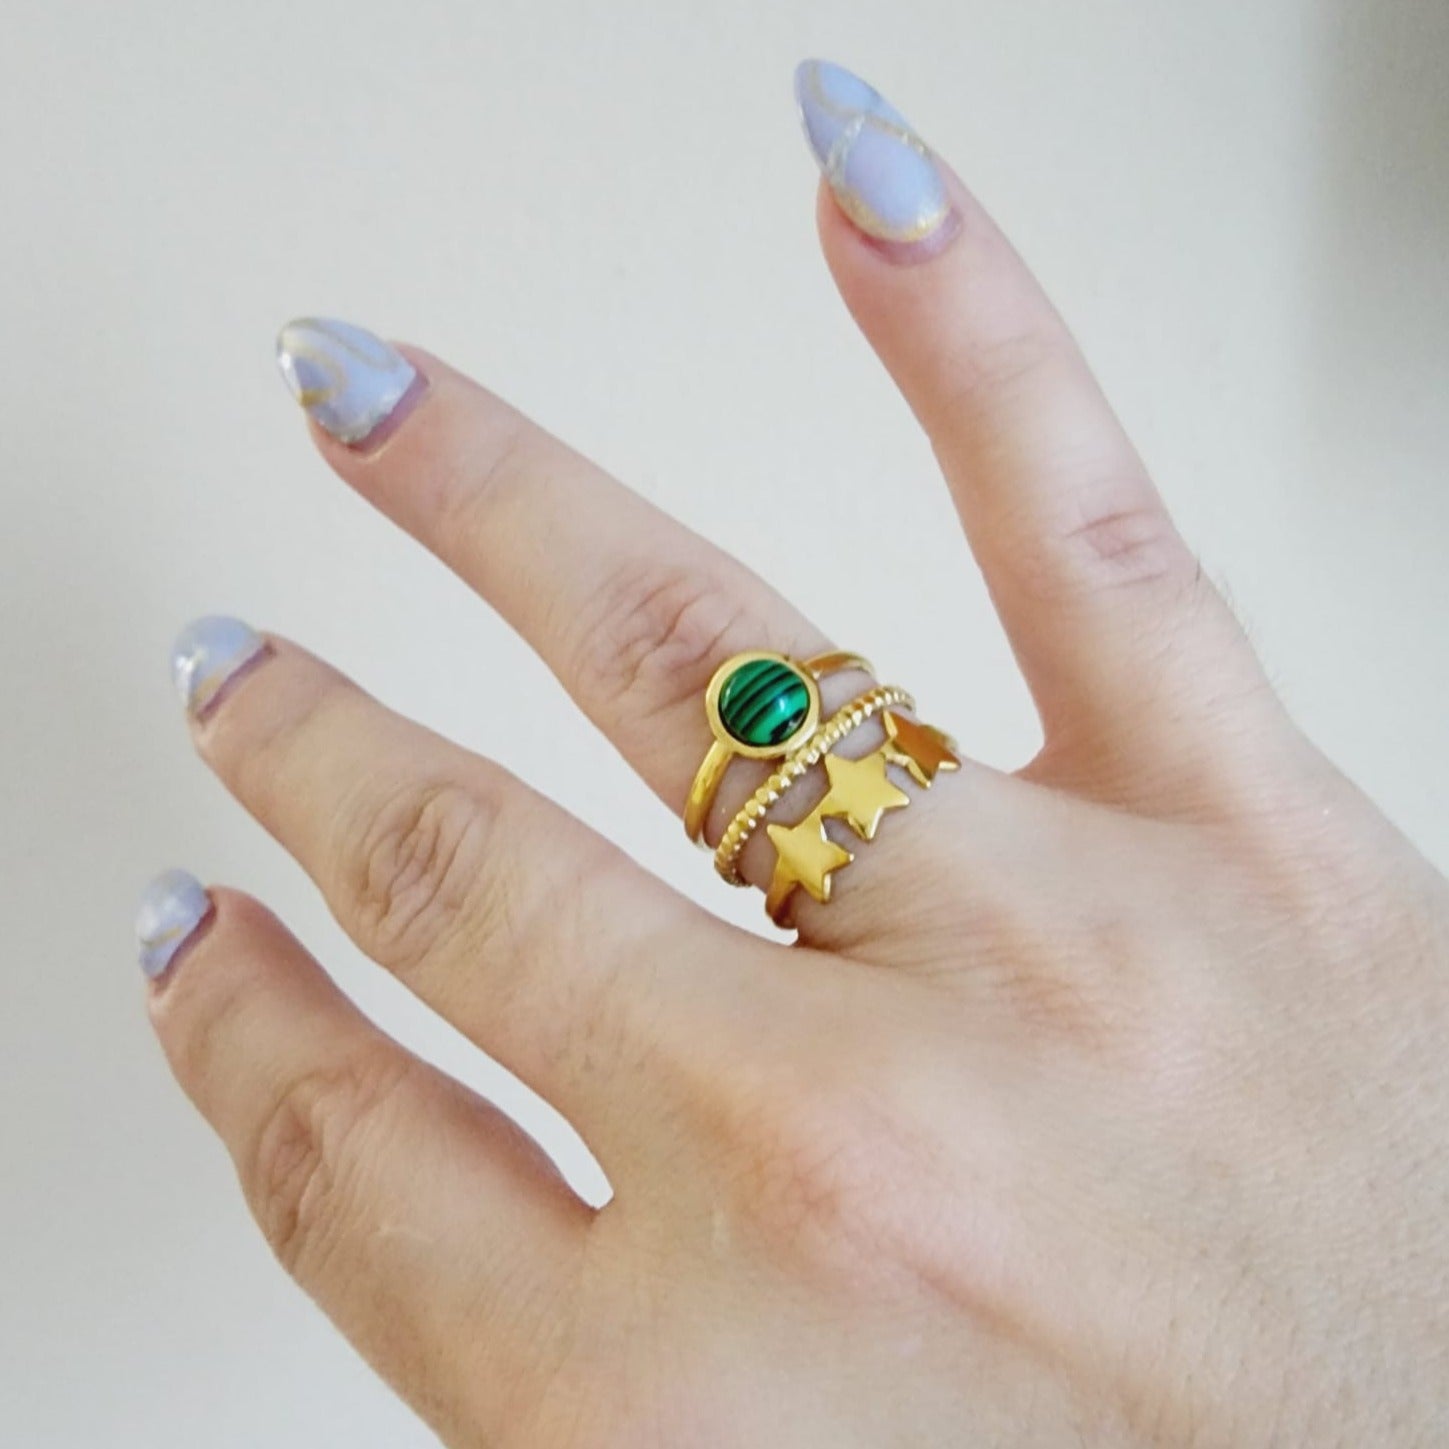 Emerald ring, Star ring, Adjustable bold ring, Adjustable Gold ring, Delicate and simple ring, chunky star ring, green gold ring, waterproof ring, hypoallergenic ring, untarnish ring, anti tarnish ring, anillo de estrellas, Water Resistant Jewelry